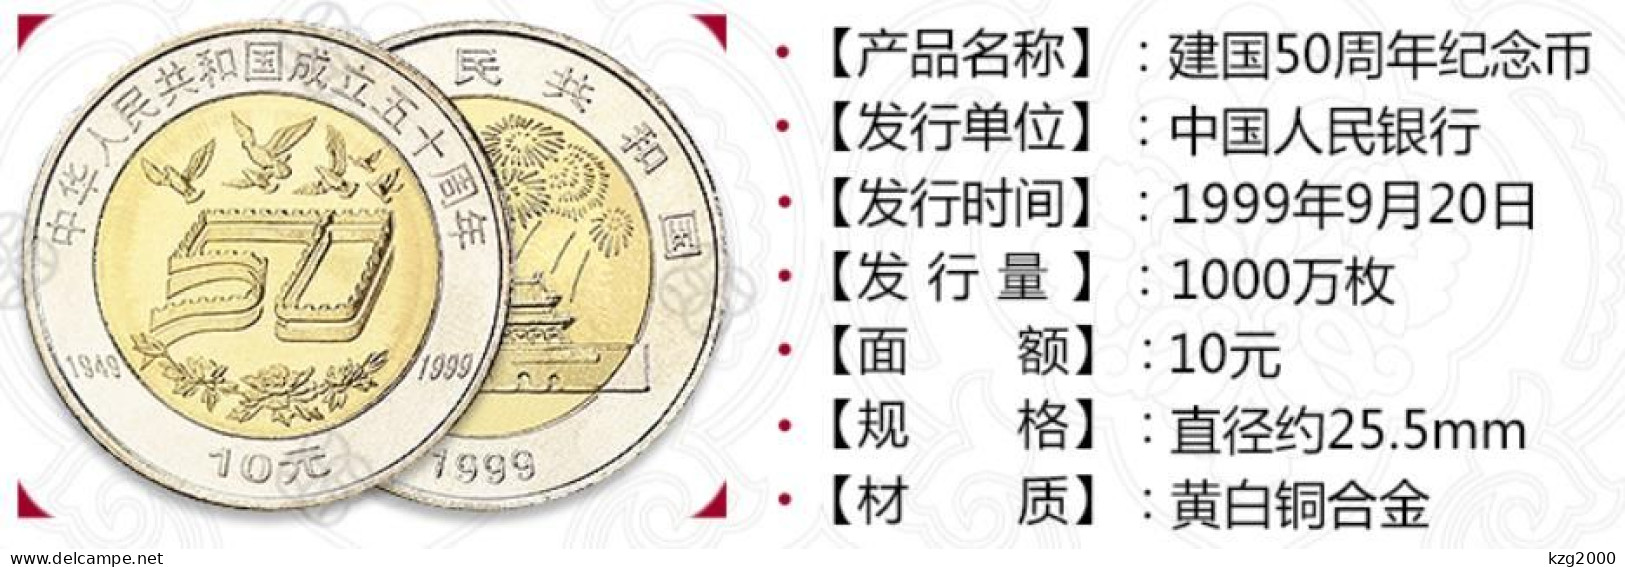 China 10 Yuan Coins 1999 PRC Found 50TH Anniversary COMM Coin 25.5mm Yellow White Copper Alloy Coin 1 Pcs - China